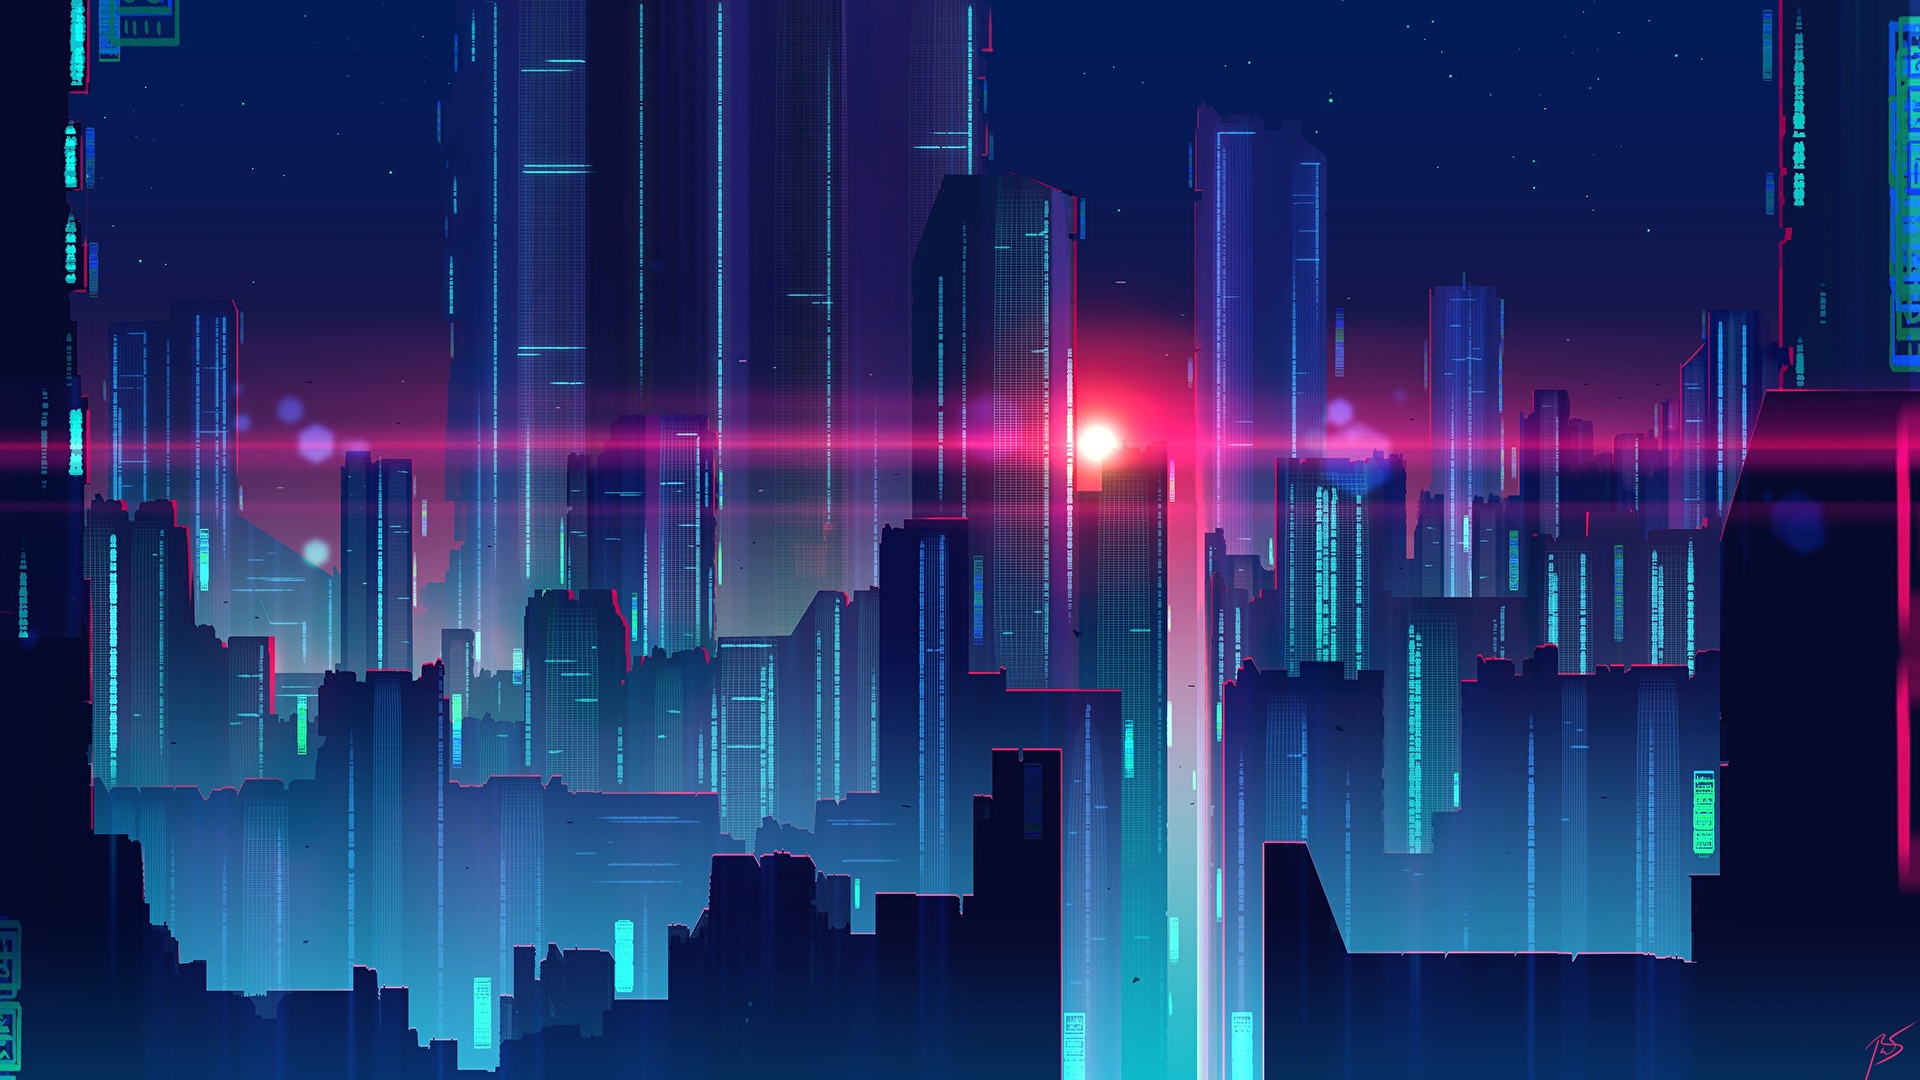 Wallpaper Synthwave By Joey Jazz Skyscrapers Houses Cities 19x1080